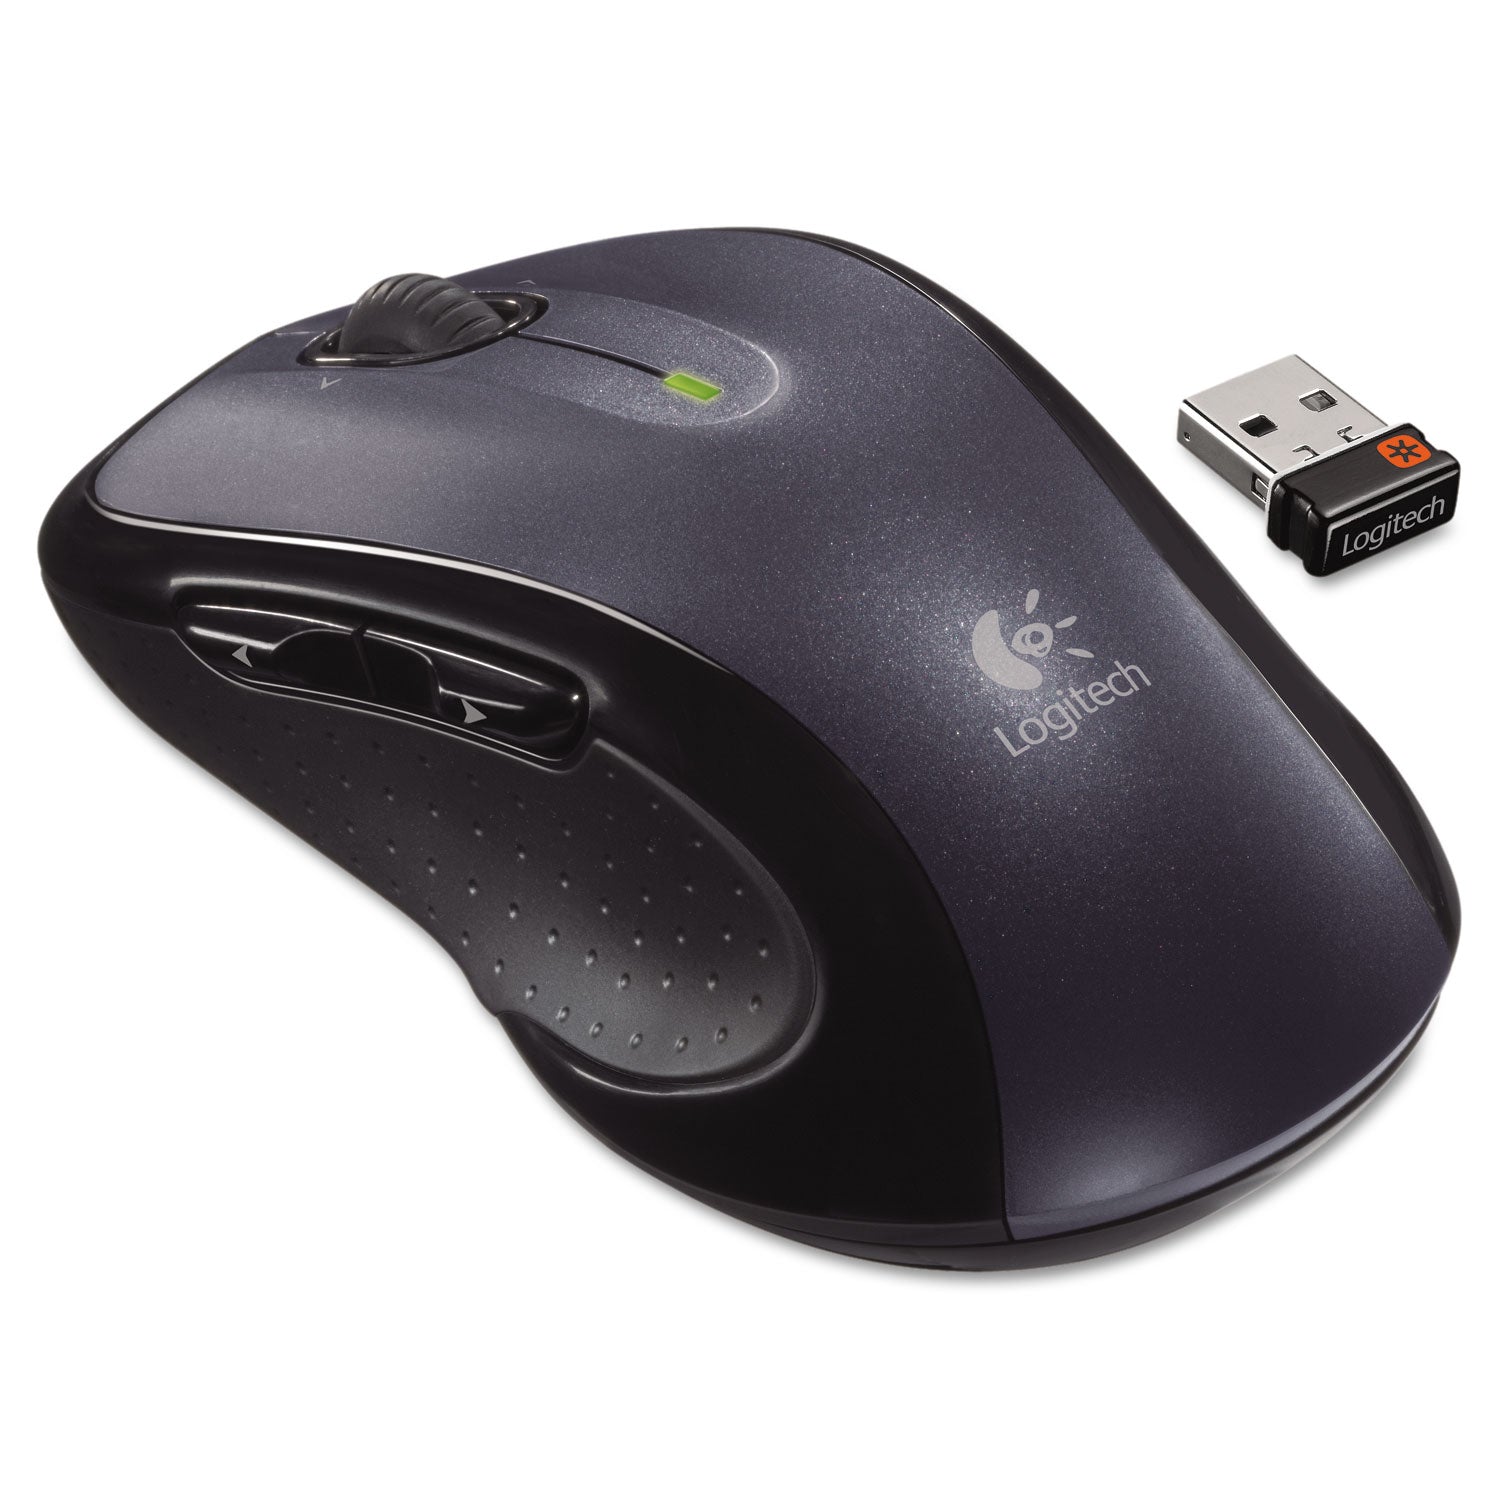 M510 Wireless Mouse, 2.4 GHz Frequency/30 ft Wireless Range, Right Hand Use, Dark Gray - 